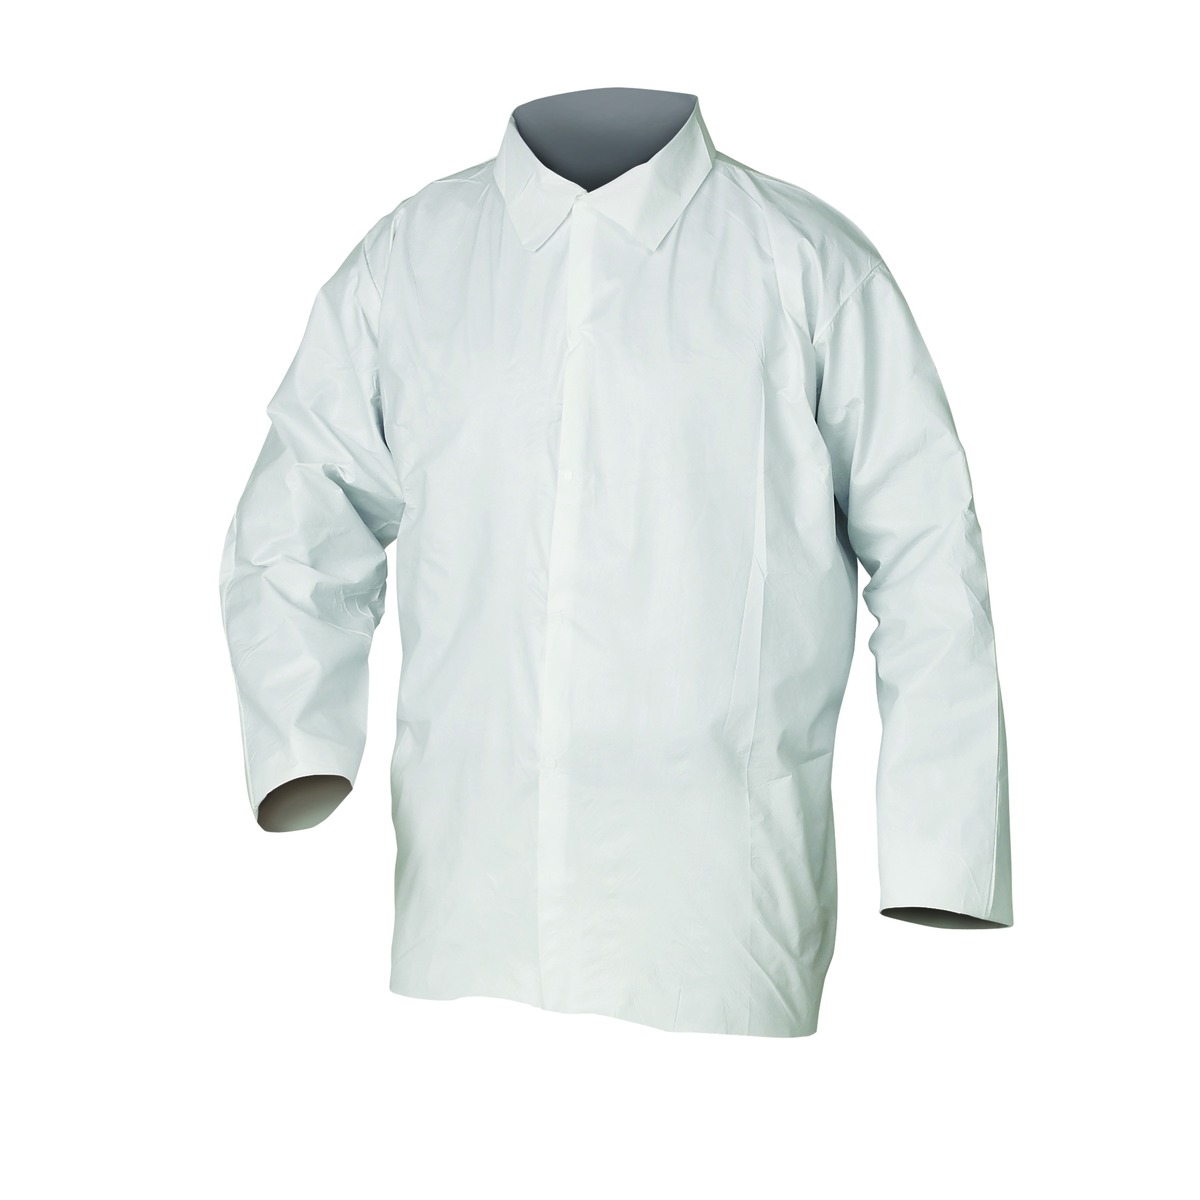 Kimberly-Clark Professional™ Large White KleenGuard™ A20 SMMMS Disposable Shirt (Availability restrictions apply.)